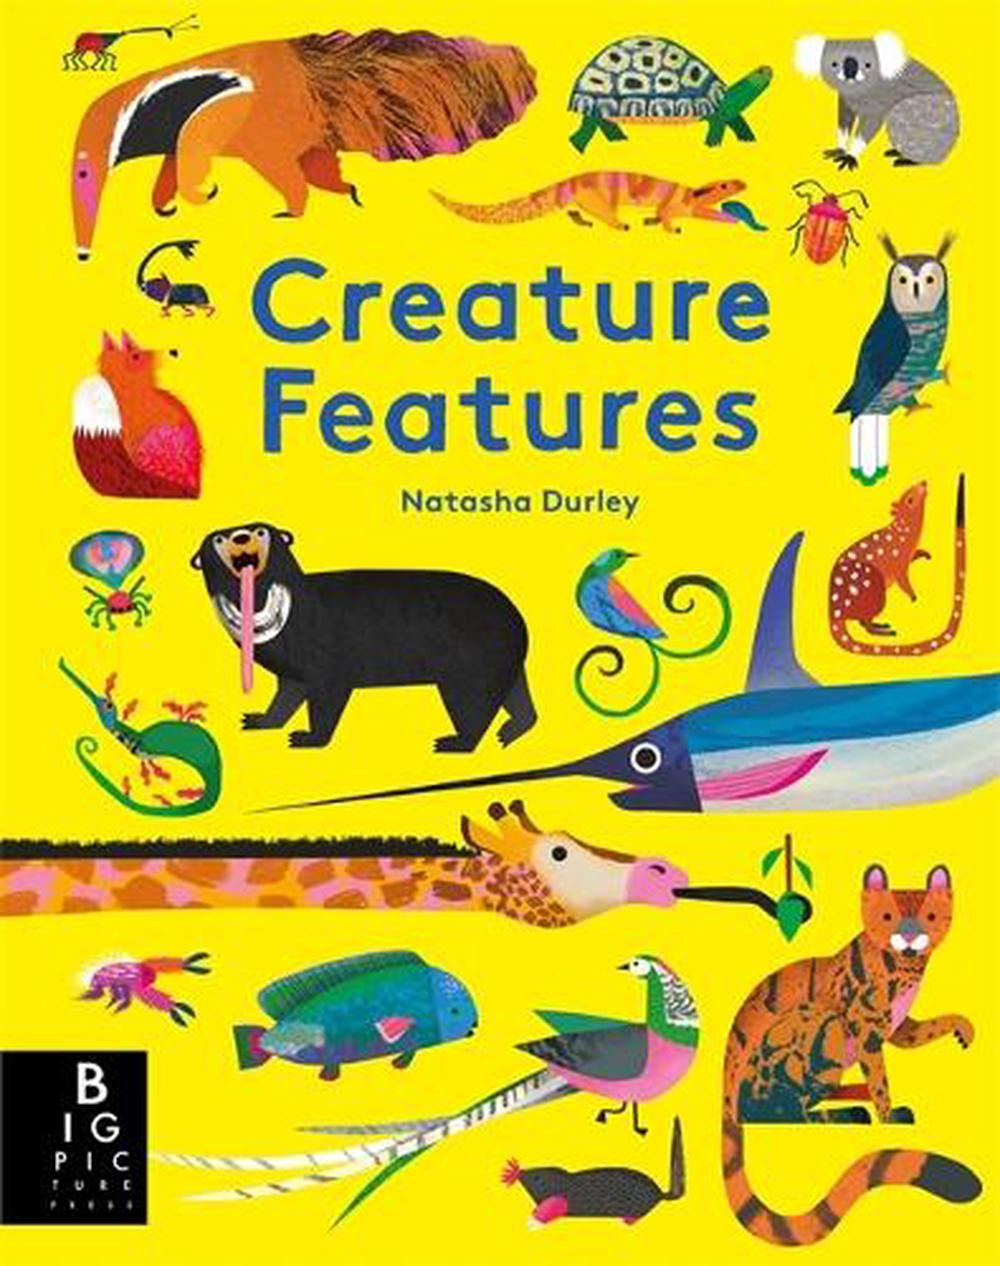 Creature Features by Natasha Durley (English) Hardcover Book Free